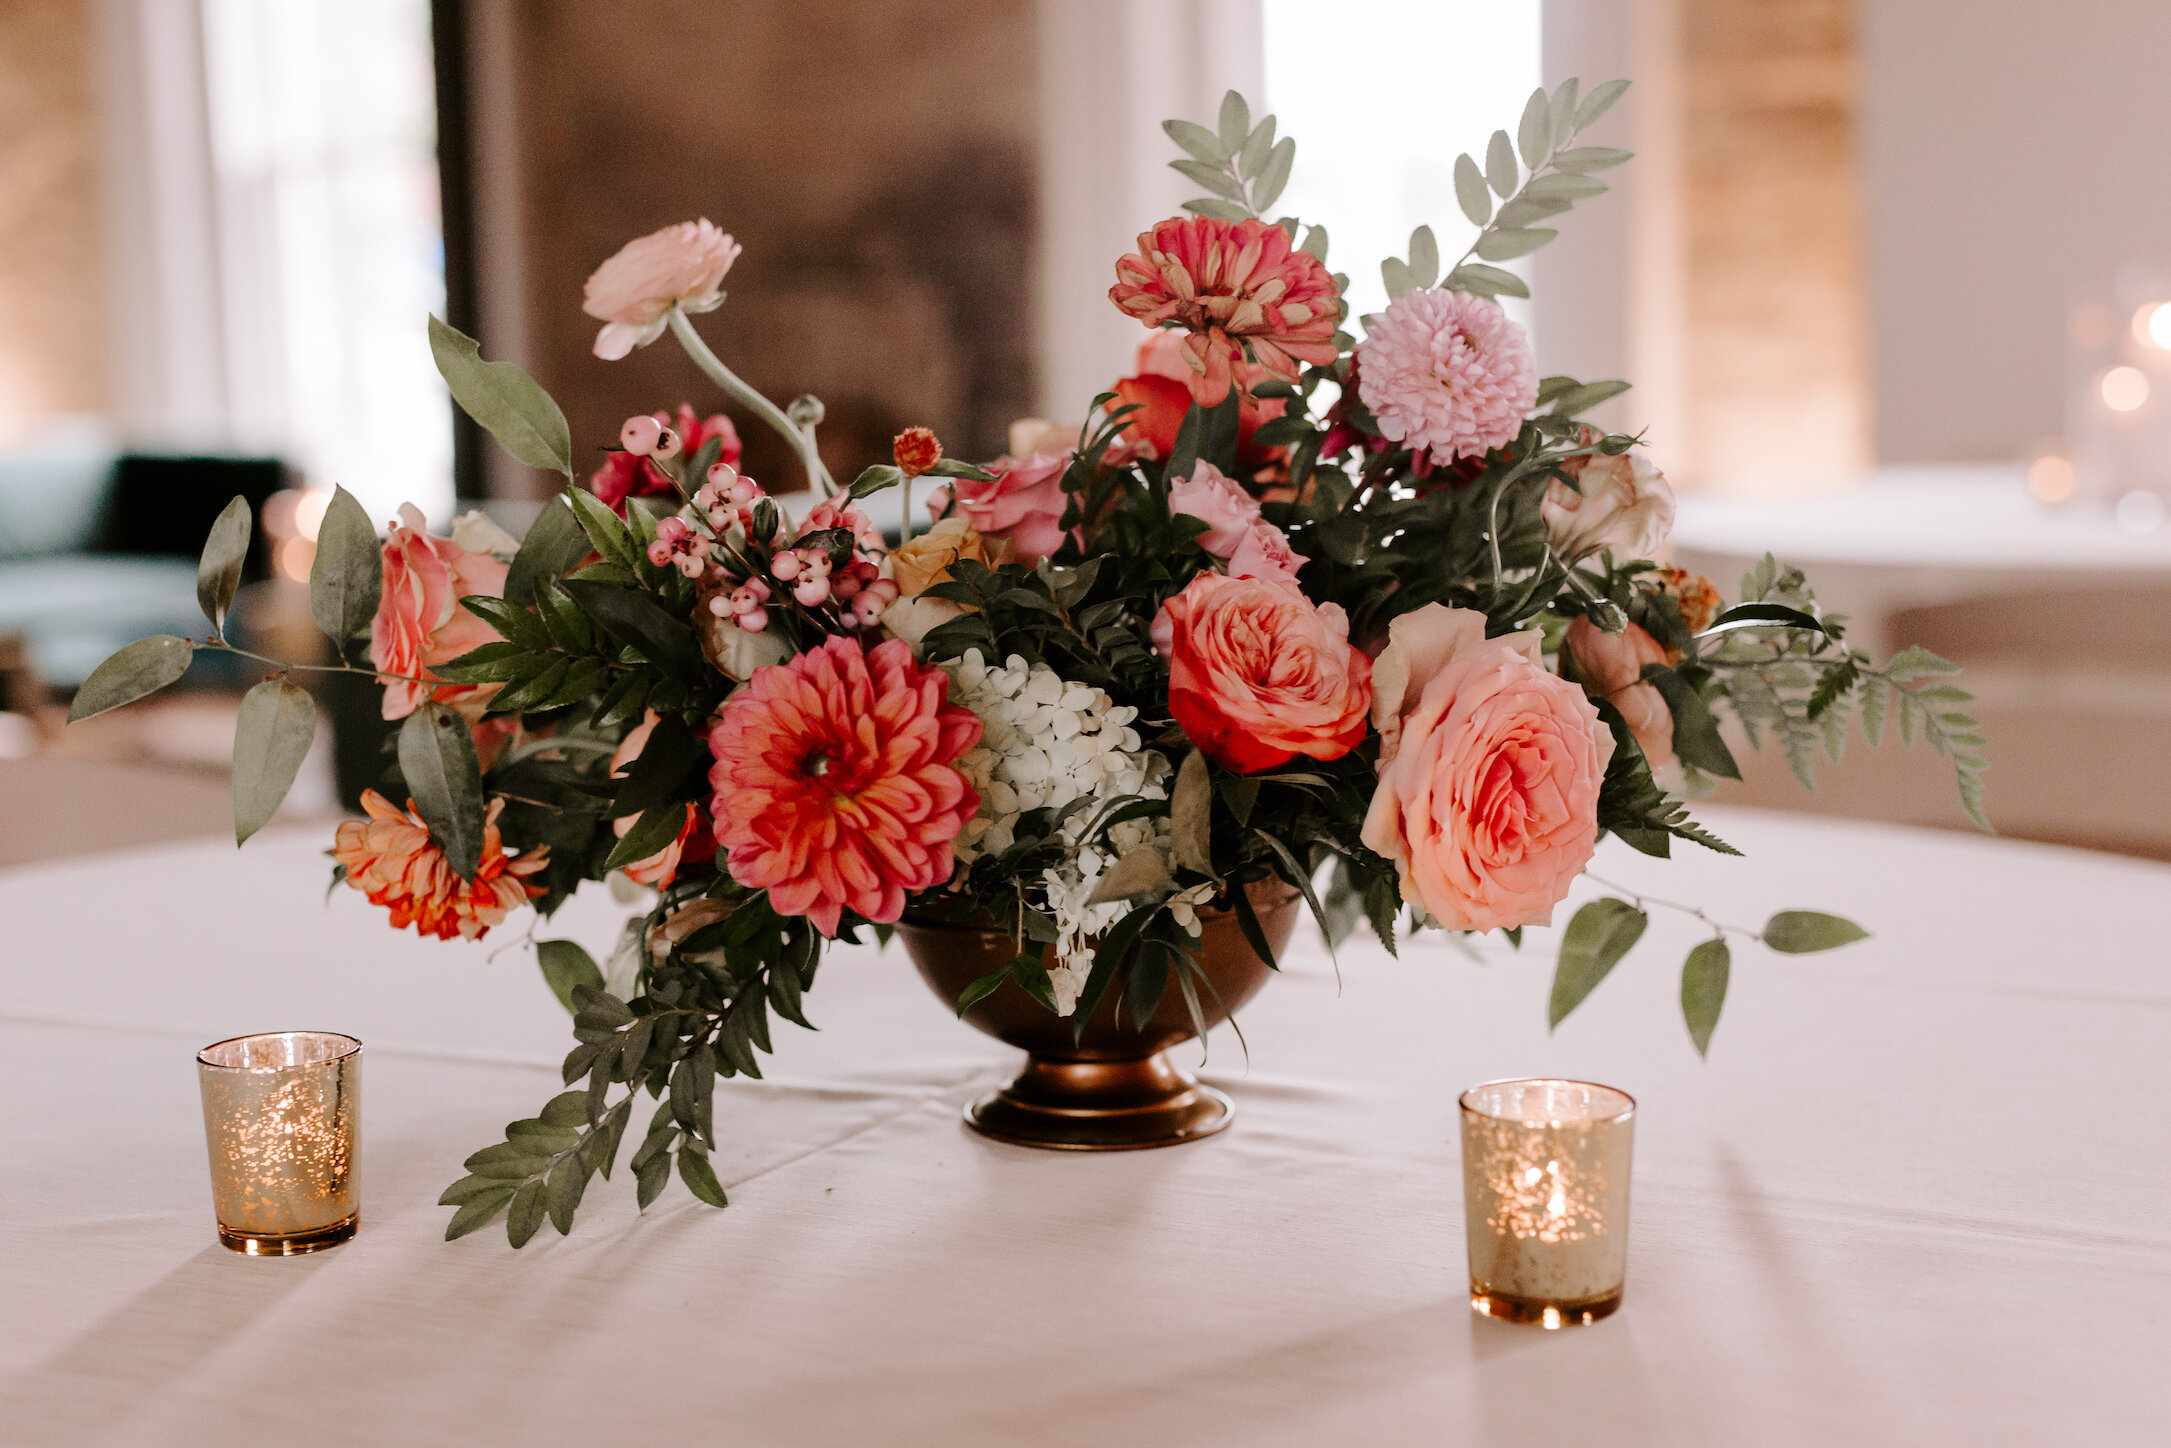 Bright and summery centerpieces filled with coral zinnias, fuchsia and blush dahlias, tangerine ranunculus, petal-heavy roses, pink snowberry, fluffy hydrangea, and sprawling smilax vine. Designed by Nashville wedding floral designer, Rosemary & Fin…